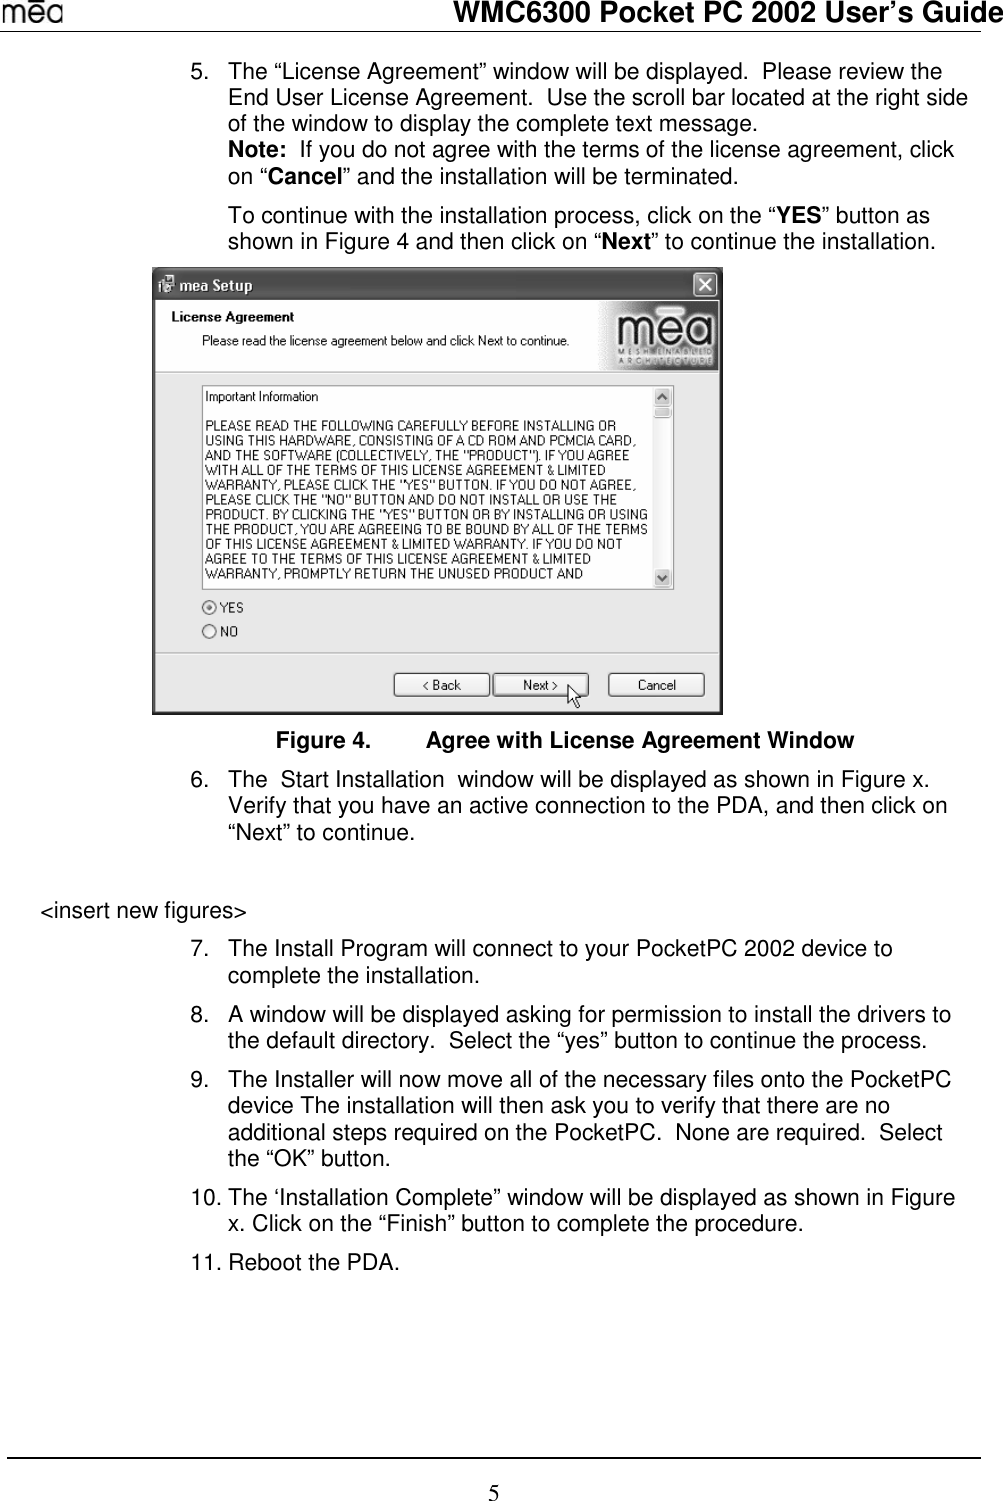   WMC6300 Pocket PC 2002 User’s Guide 5 5.  The “License Agreement” window will be displayed.  Please review the End User License Agreement.  Use the scroll bar located at the right side of the window to display the complete text message.   Note:  If you do not agree with the terms of the license agreement, click on “Cancel” and the installation will be terminated. To continue with the installation process, click on the “YES” button as shown in Figure 4 and then click on “Next” to continue the installation.    Figure 4.  Agree with License Agreement Window 6.  The  Start Installation  window will be displayed as shown in Figure x.  Verify that you have an active connection to the PDA, and then click on “Next” to continue.  &lt;insert new figures&gt; 7.  The Install Program will connect to your PocketPC 2002 device to complete the installation. 8.  A window will be displayed asking for permission to install the drivers to the default directory.  Select the “yes” button to continue the process. 9.  The Installer will now move all of the necessary files onto the PocketPC device The installation will then ask you to verify that there are no additional steps required on the PocketPC.  None are required.  Select the “OK” button. 10. The ‘Installation Complete” window will be displayed as shown in Figure x. Click on the “Finish” button to complete the procedure. 11. Reboot the PDA.    